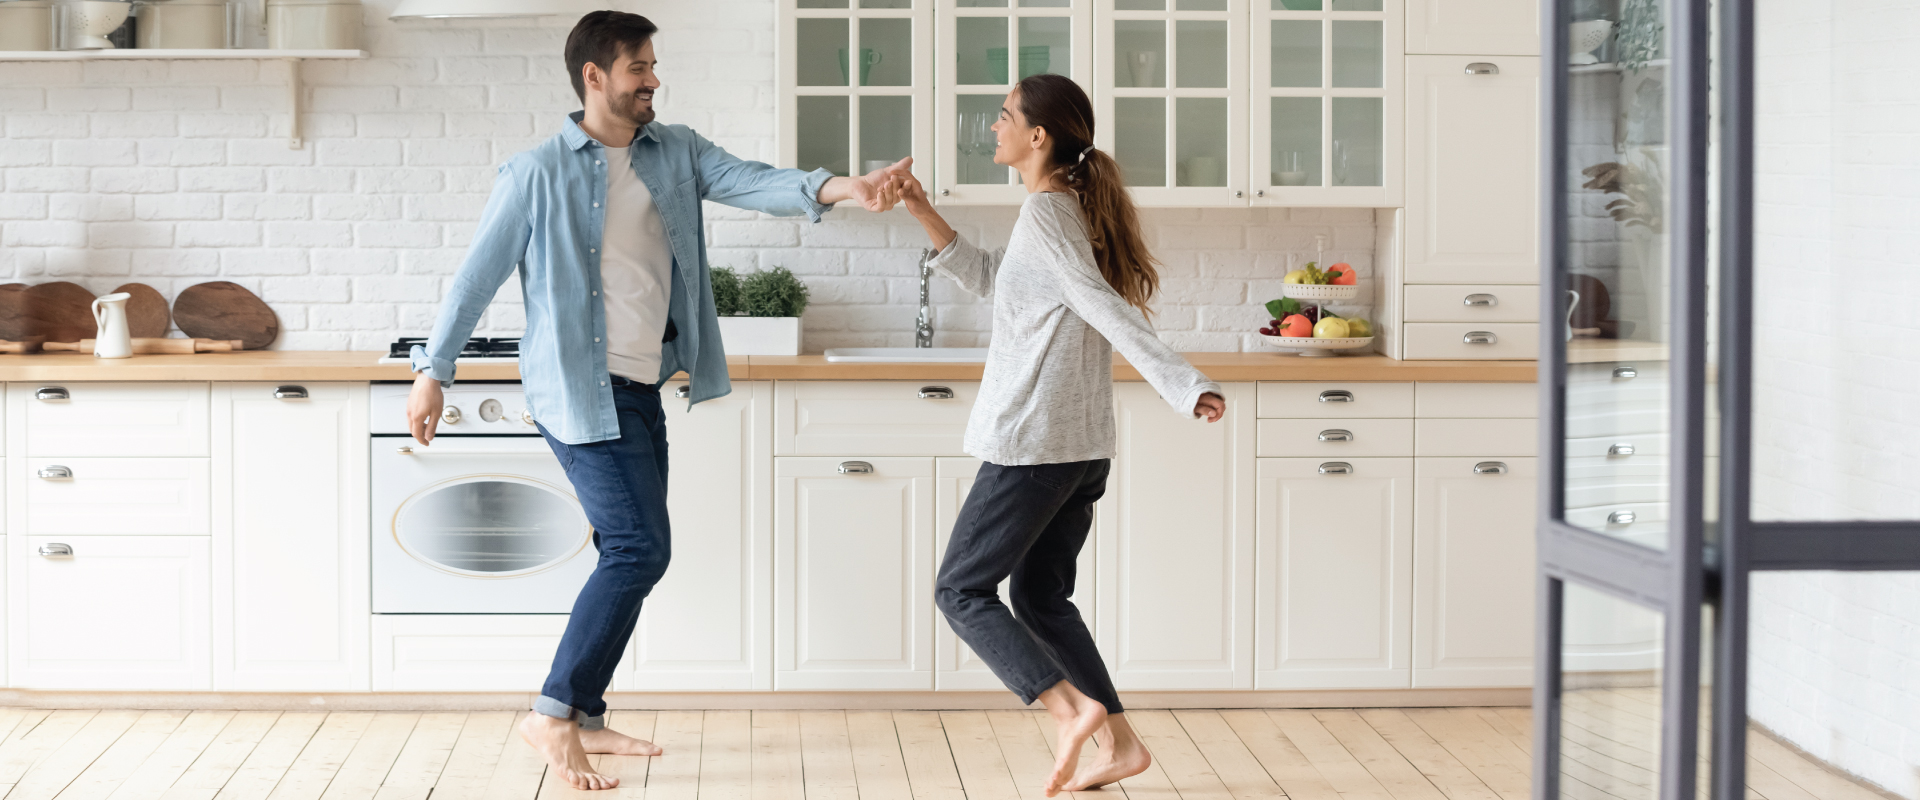 man and woman dancing in their kitchen in their new house